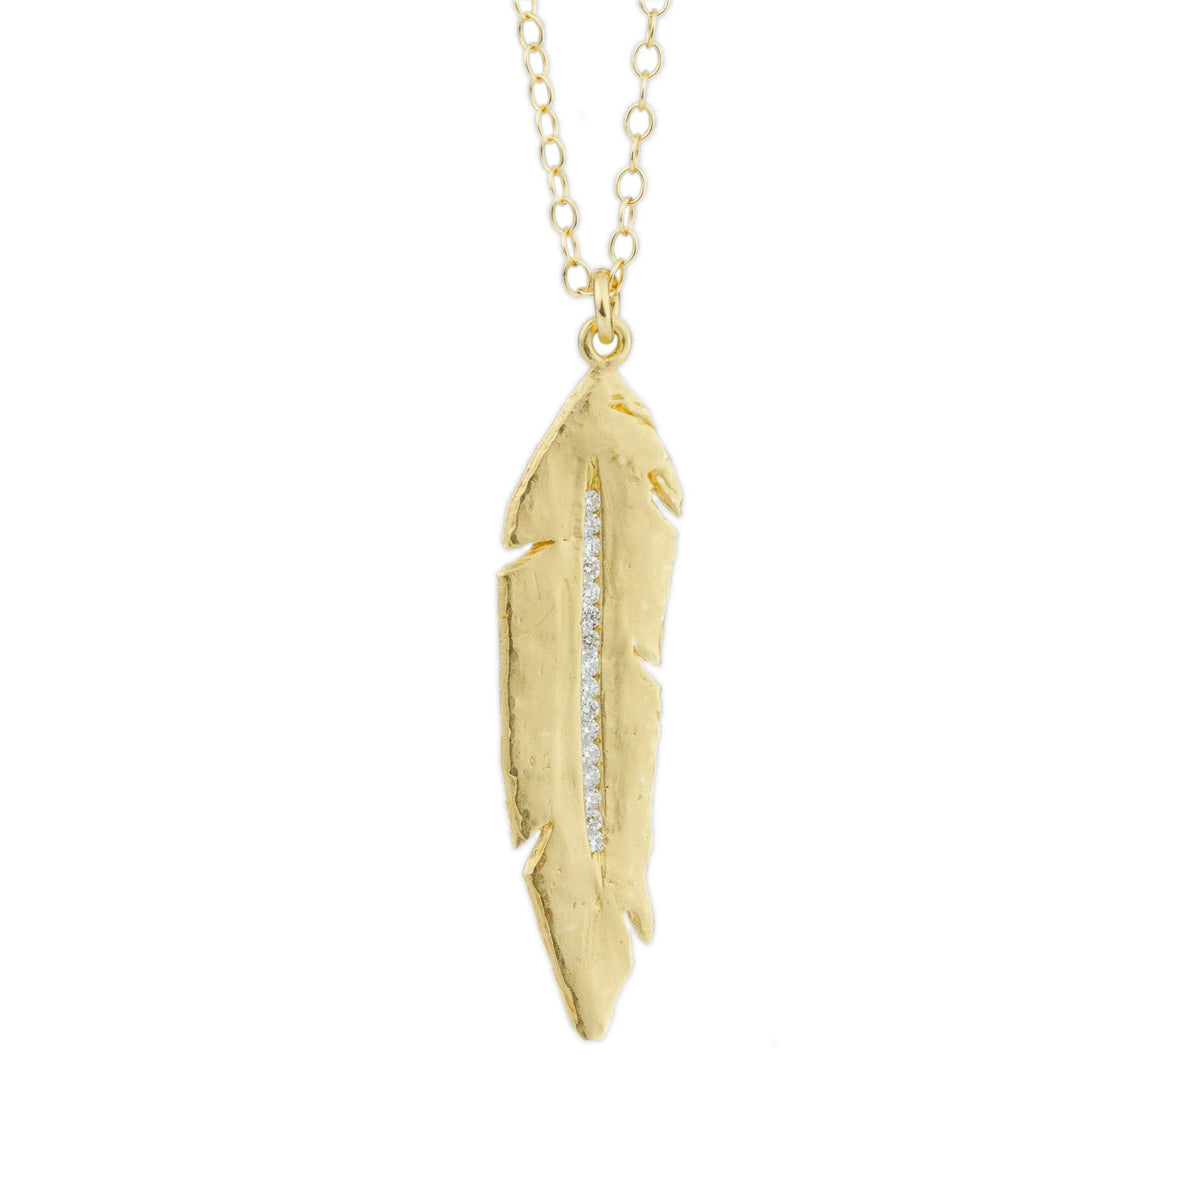 Diamond Feather Necklace - Squash Blossom Vail